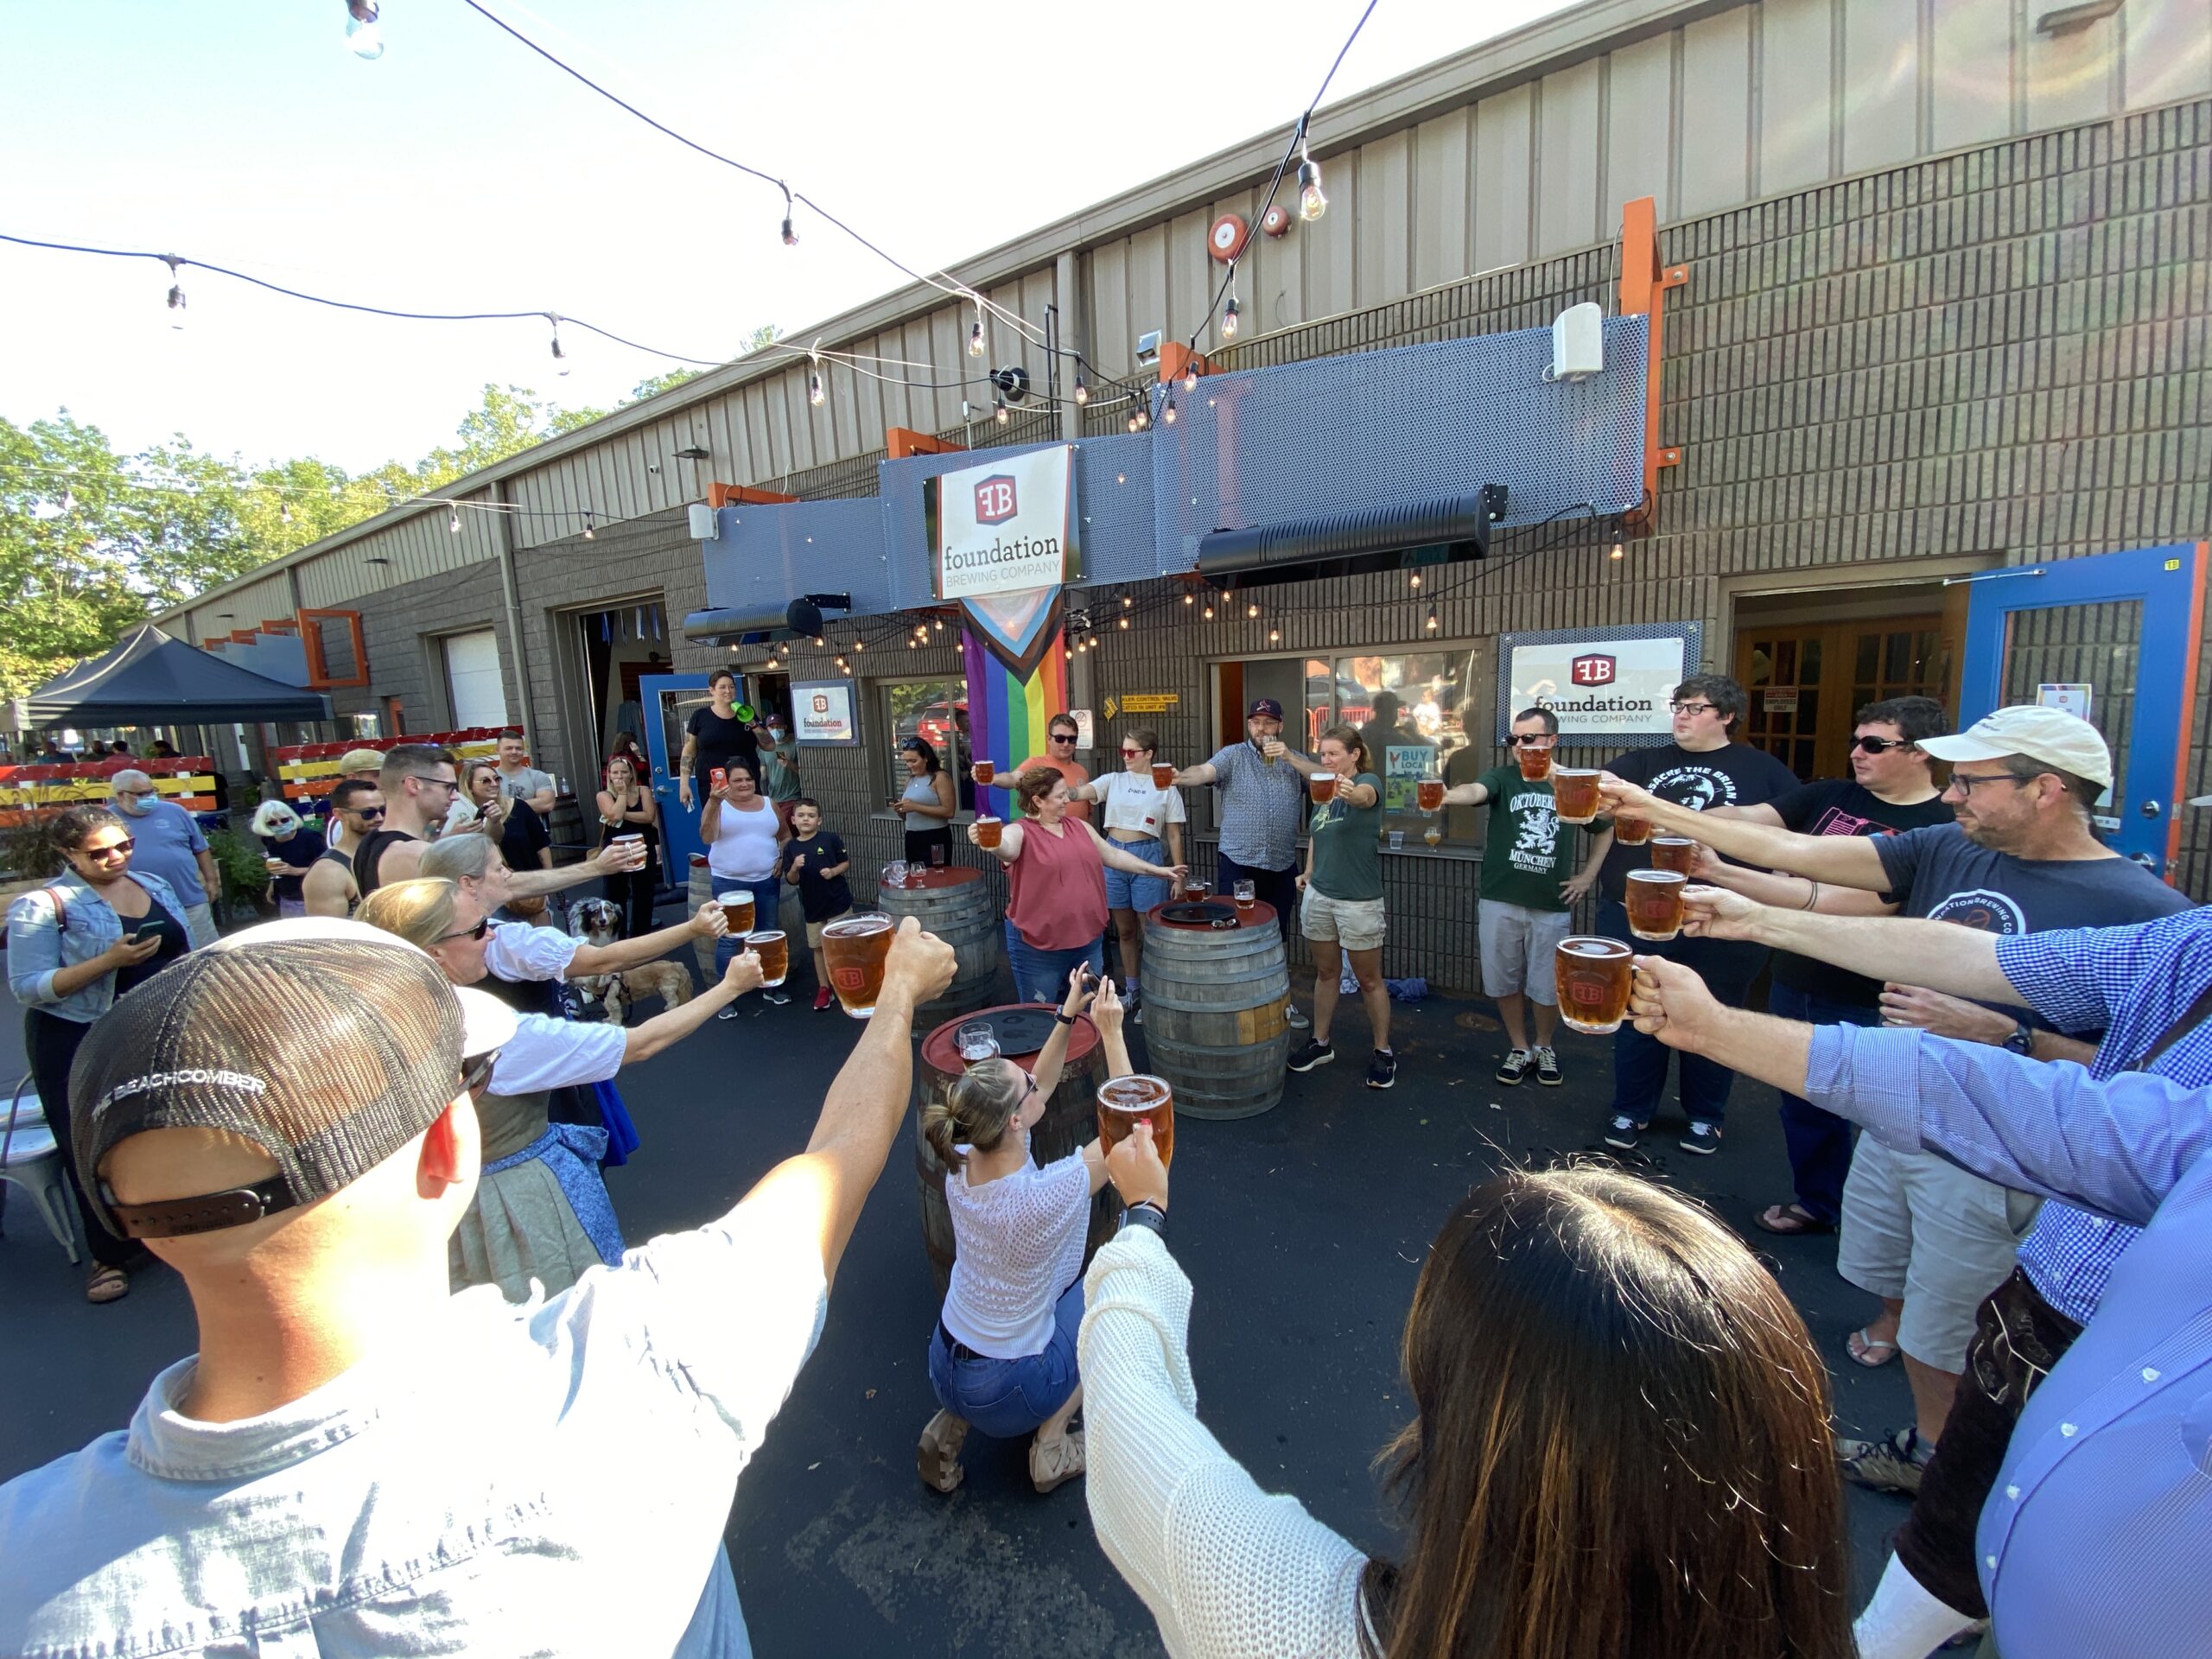 Group of people holding beer steins in front of brewery.